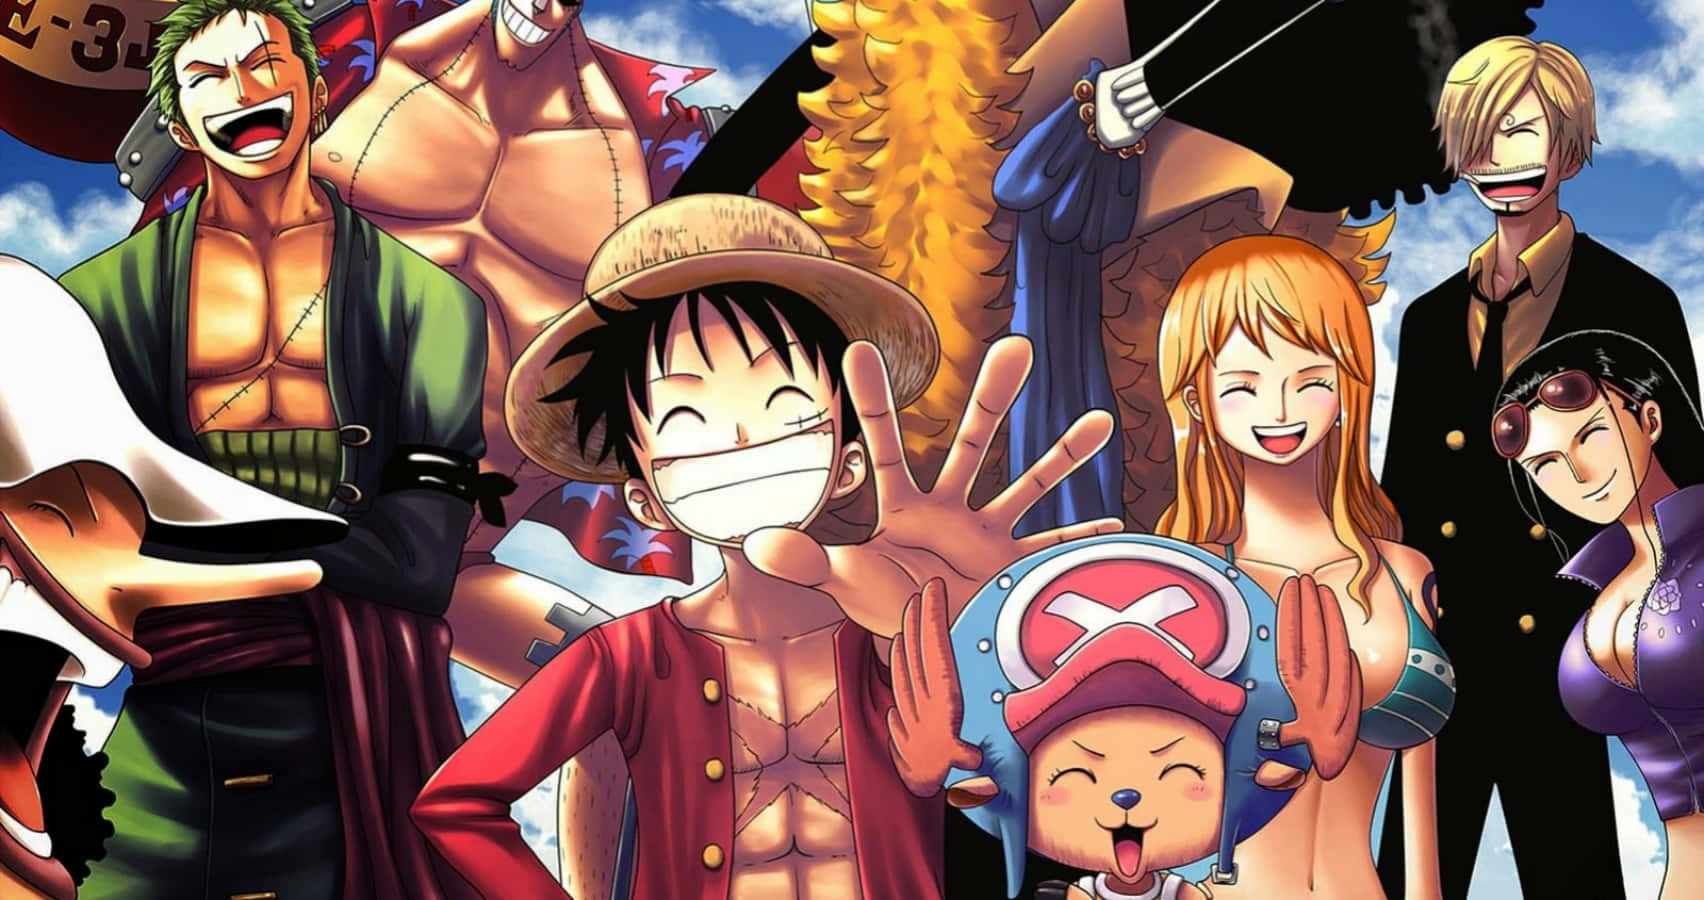 Join the Journey of the Straw Hat Pirates Wallpaper